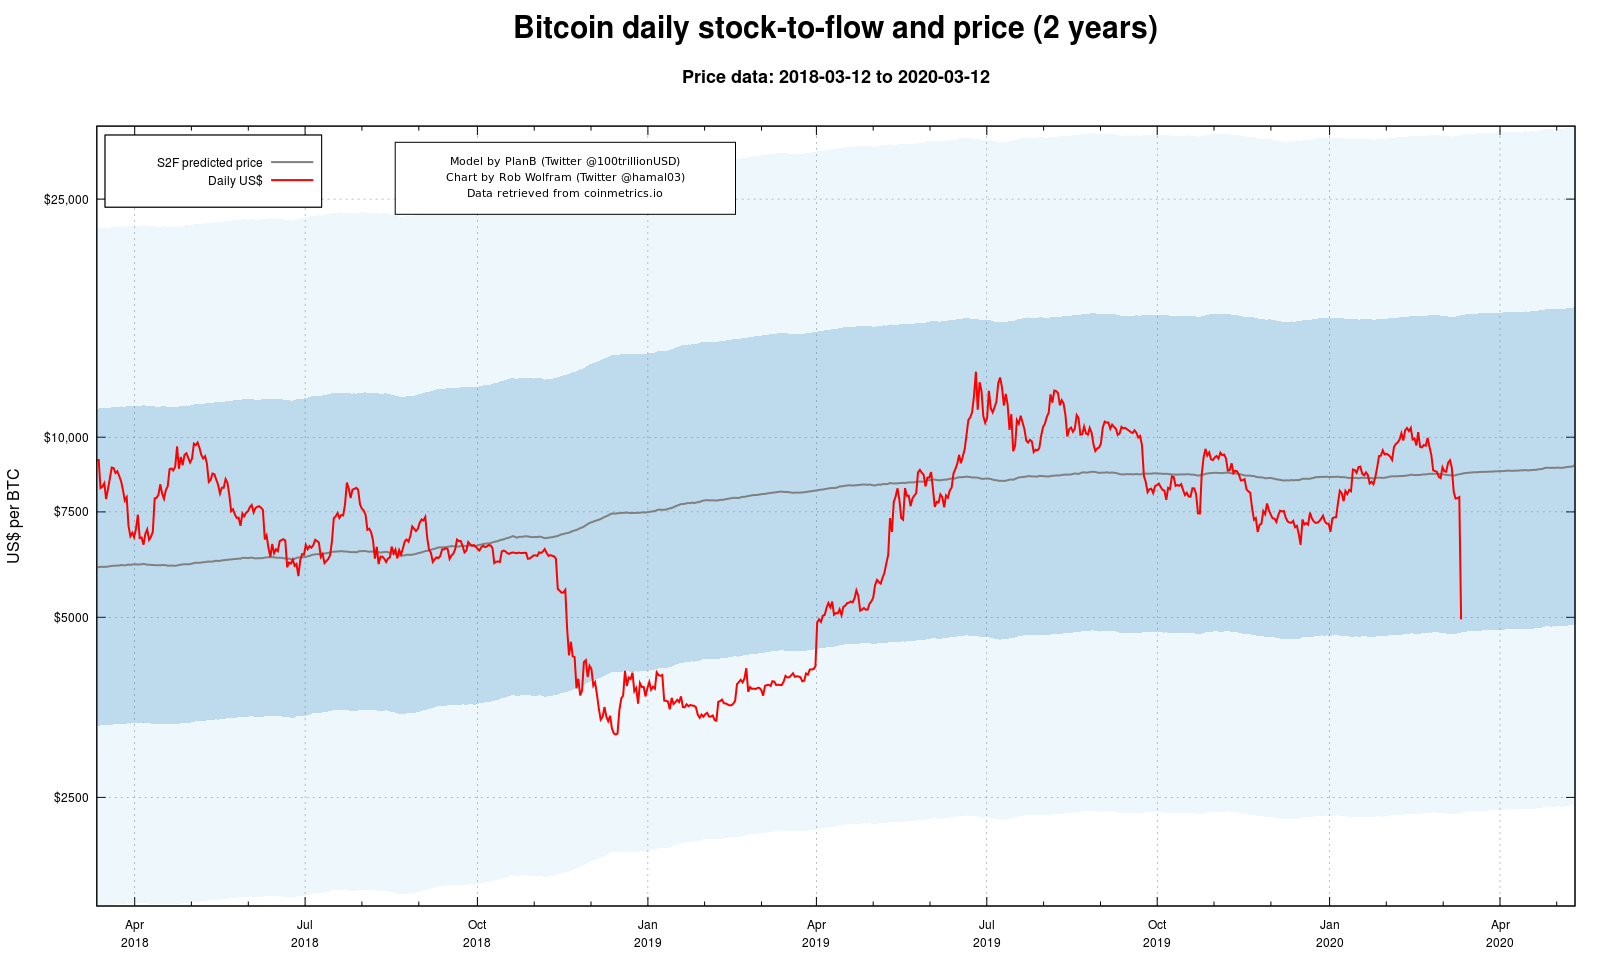 Bitcoin daily stock-to-flow price